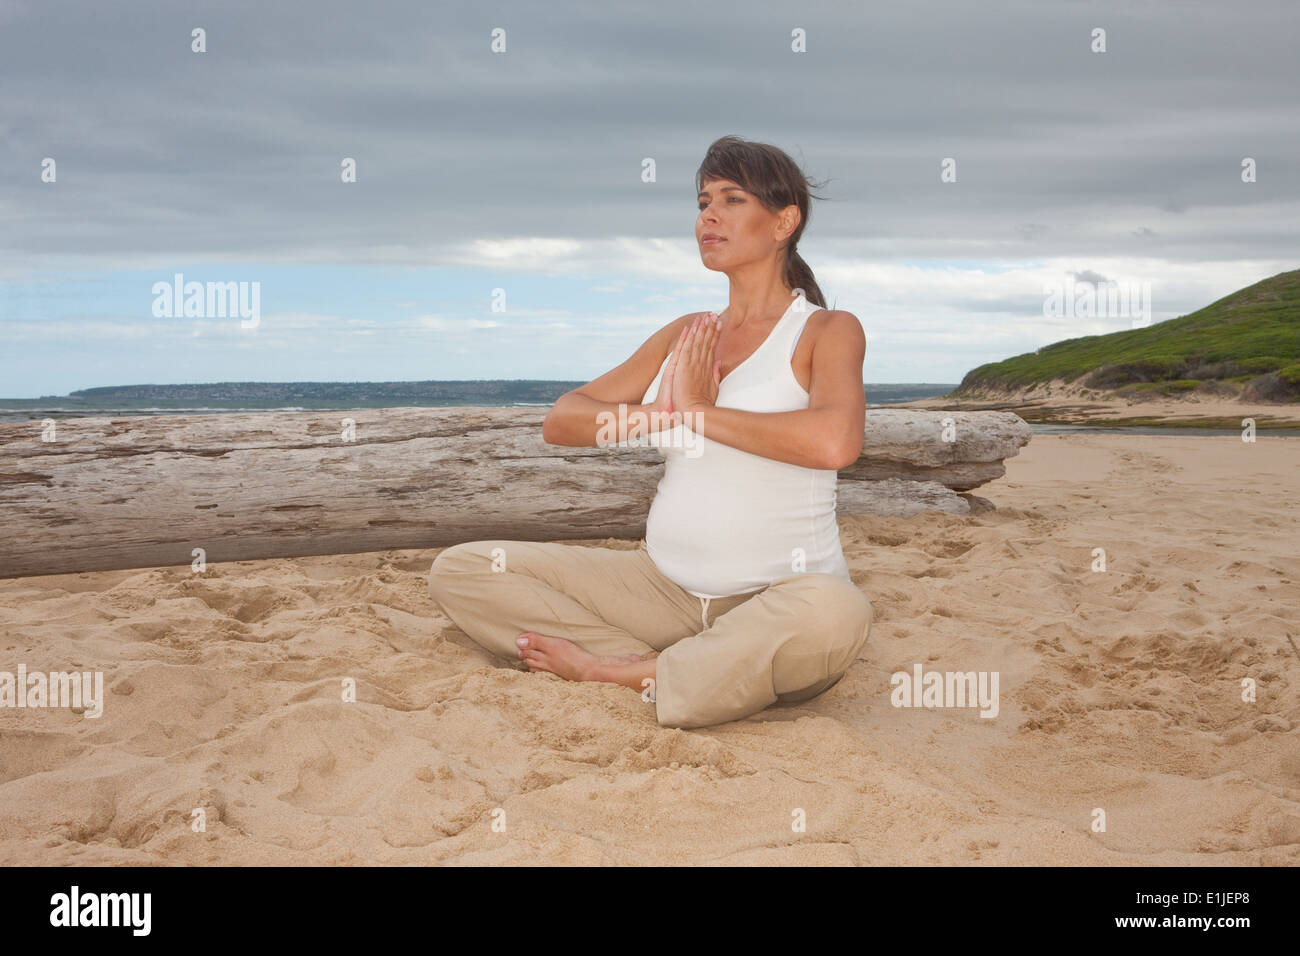 Pregnant mid adult woman practicing yoga on beach Stock Photo